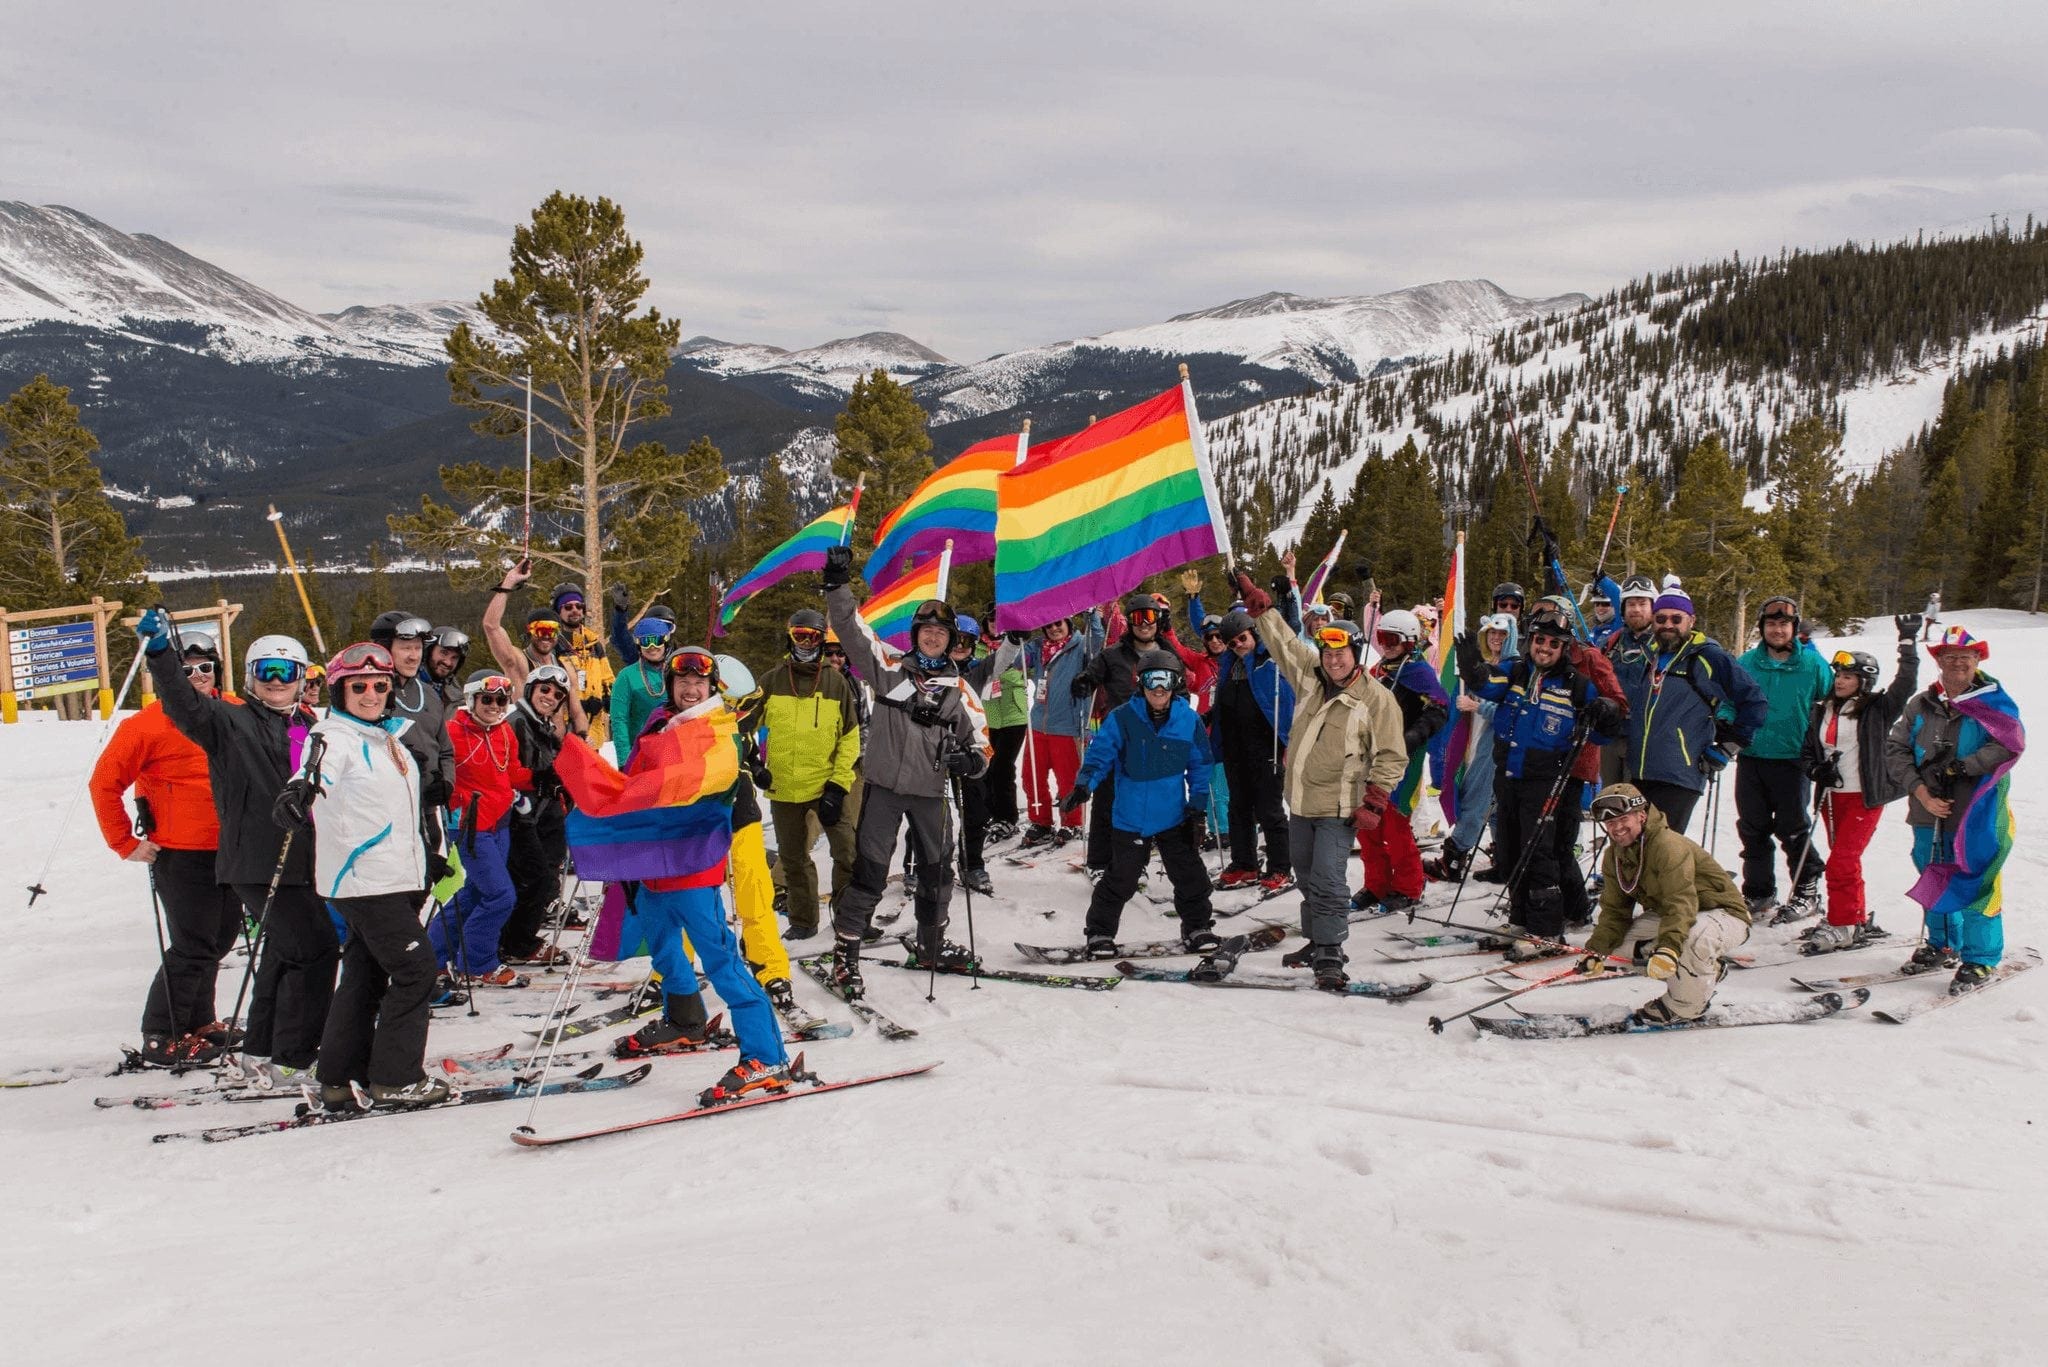 Breck Pride Group with Flags on Slopes